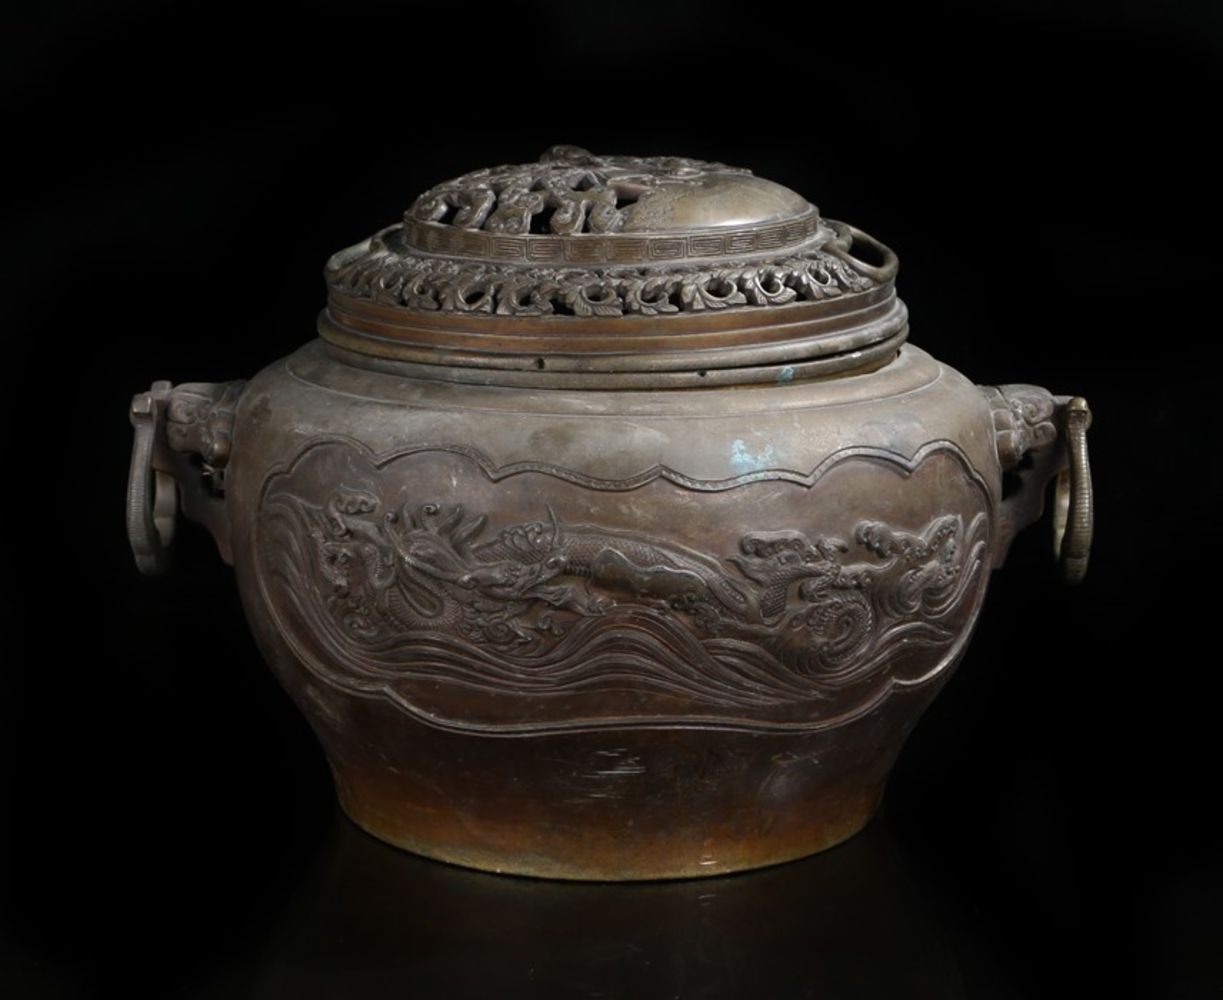 Asian Art Auction October 2020 (viewing by appointment only)